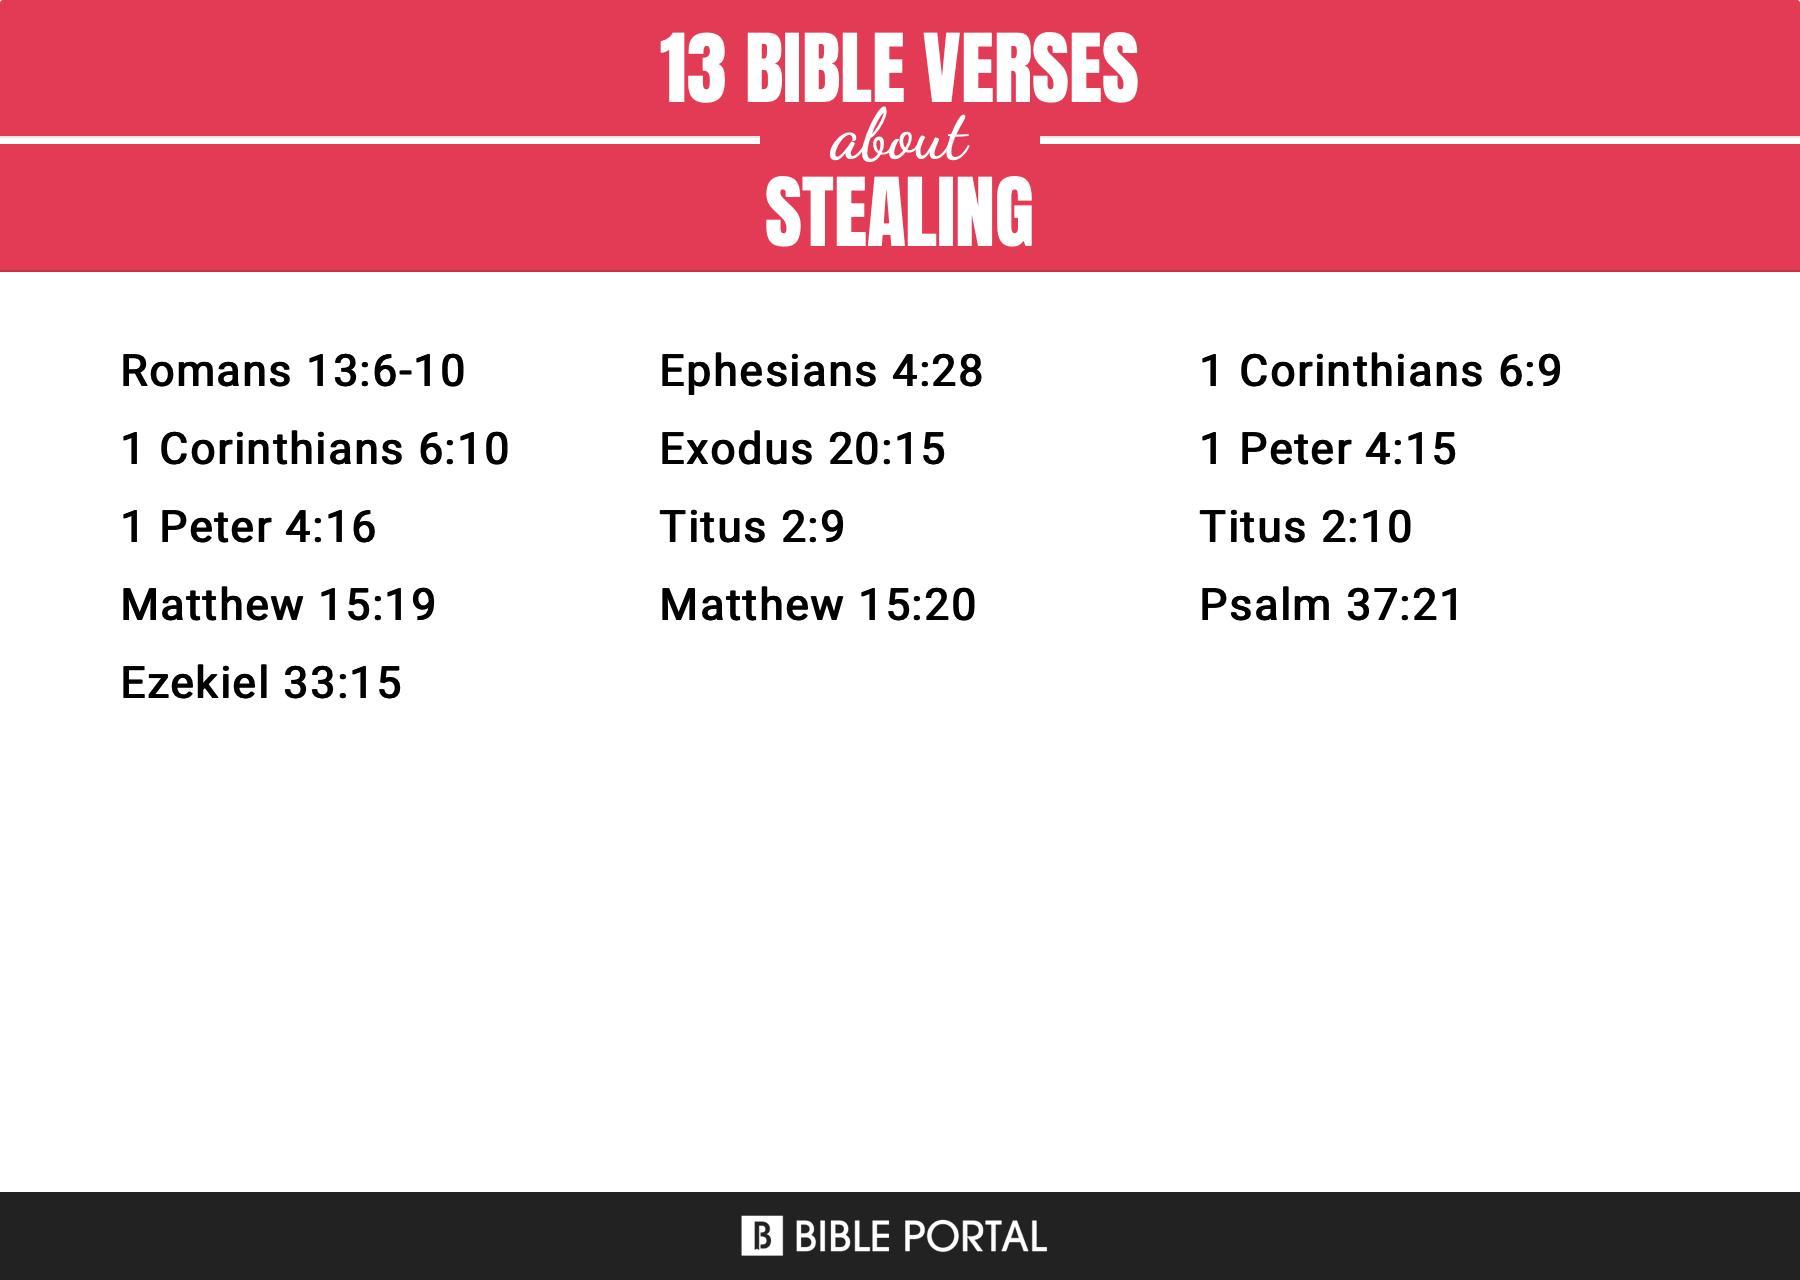 What Does the Bible Say about Stealing?